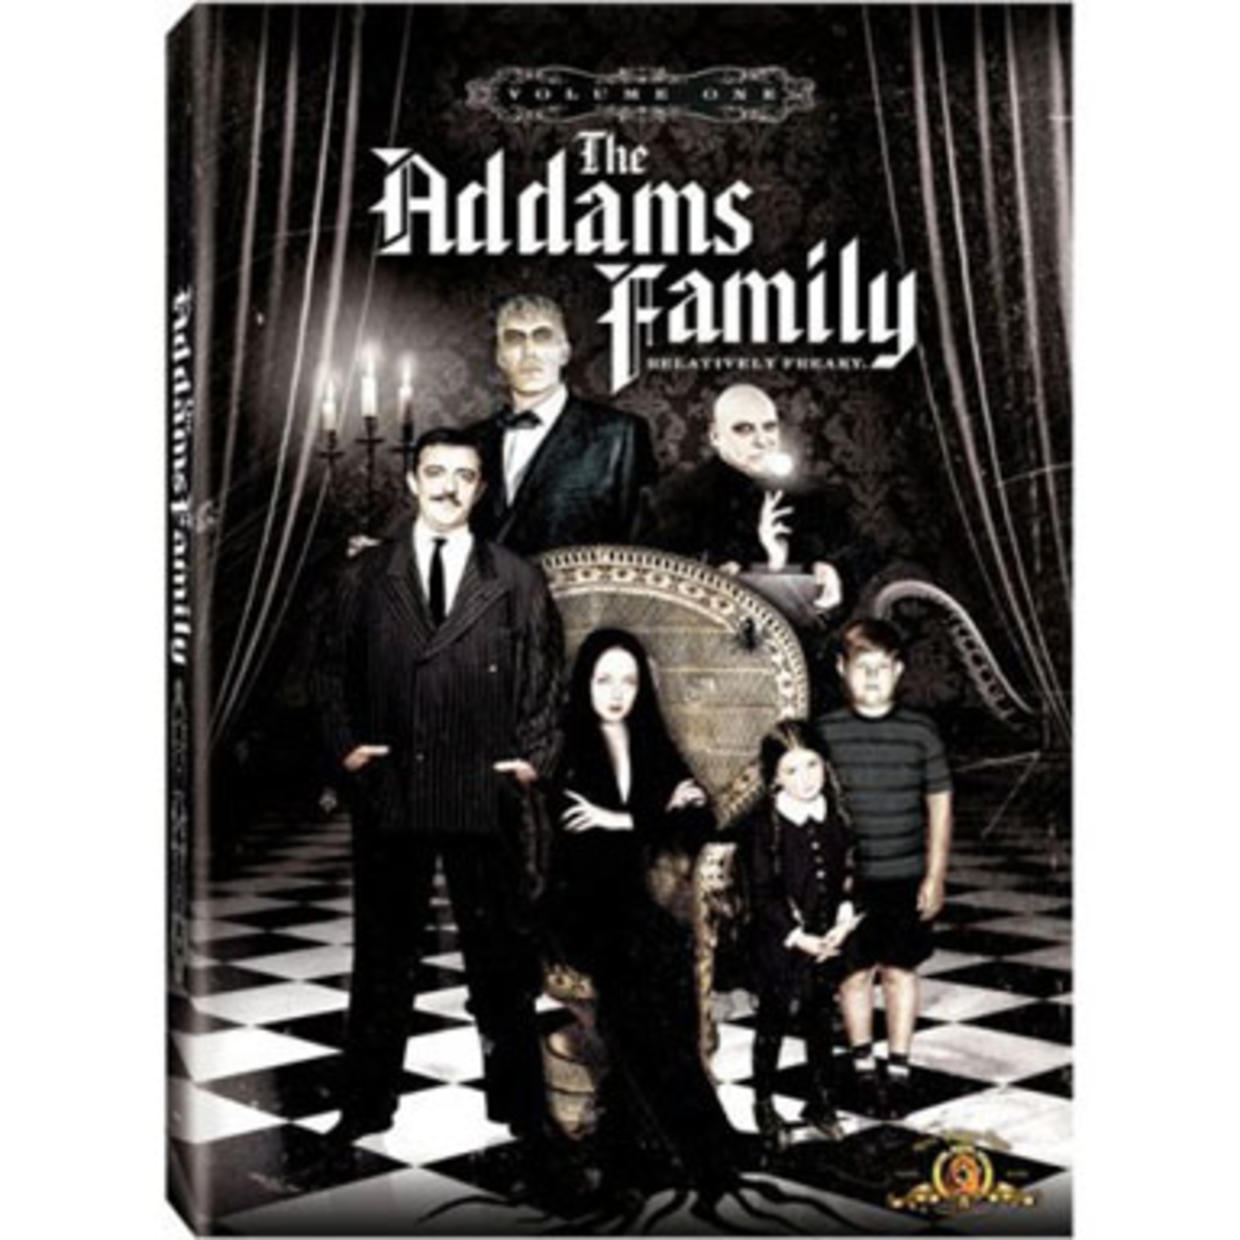 download addams family values 1993